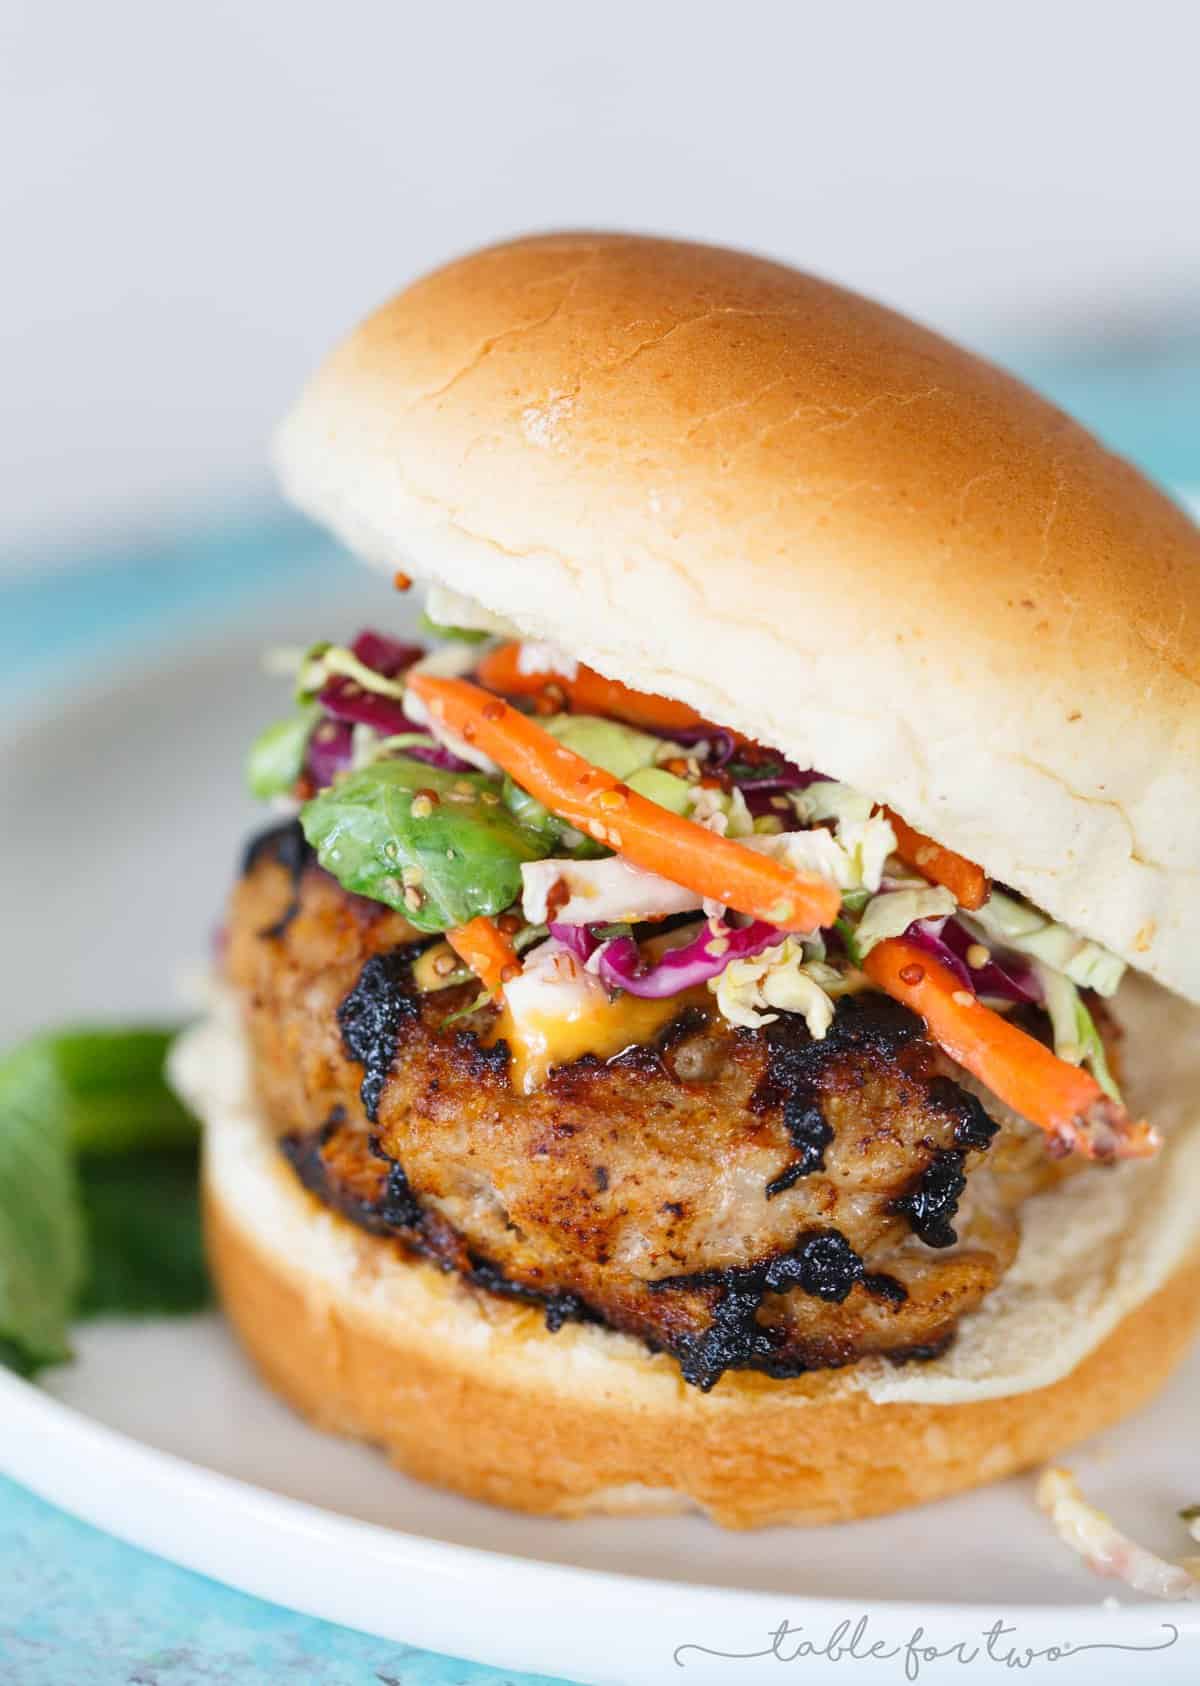 These lemongrass pork burgers offer an aromatic profile of citrus and spice! You will love how fragrant the flavors are and your tastebuds will be rejoicing! A great burger option when you're tired of the same old, same old.